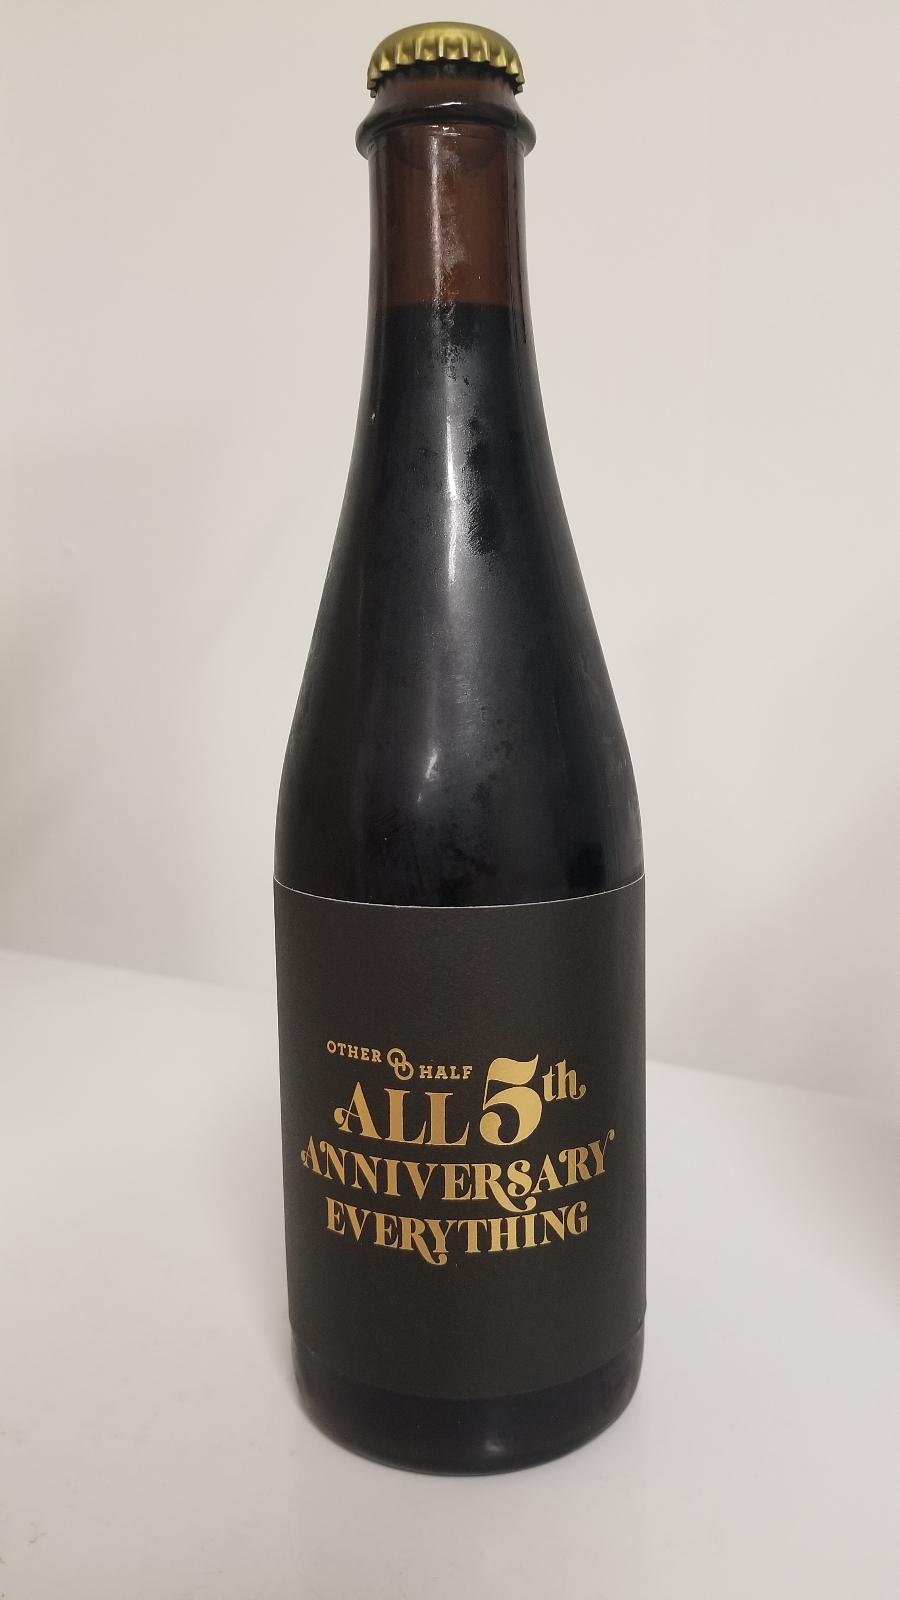 All 5th Anniversary Everything - Coffee